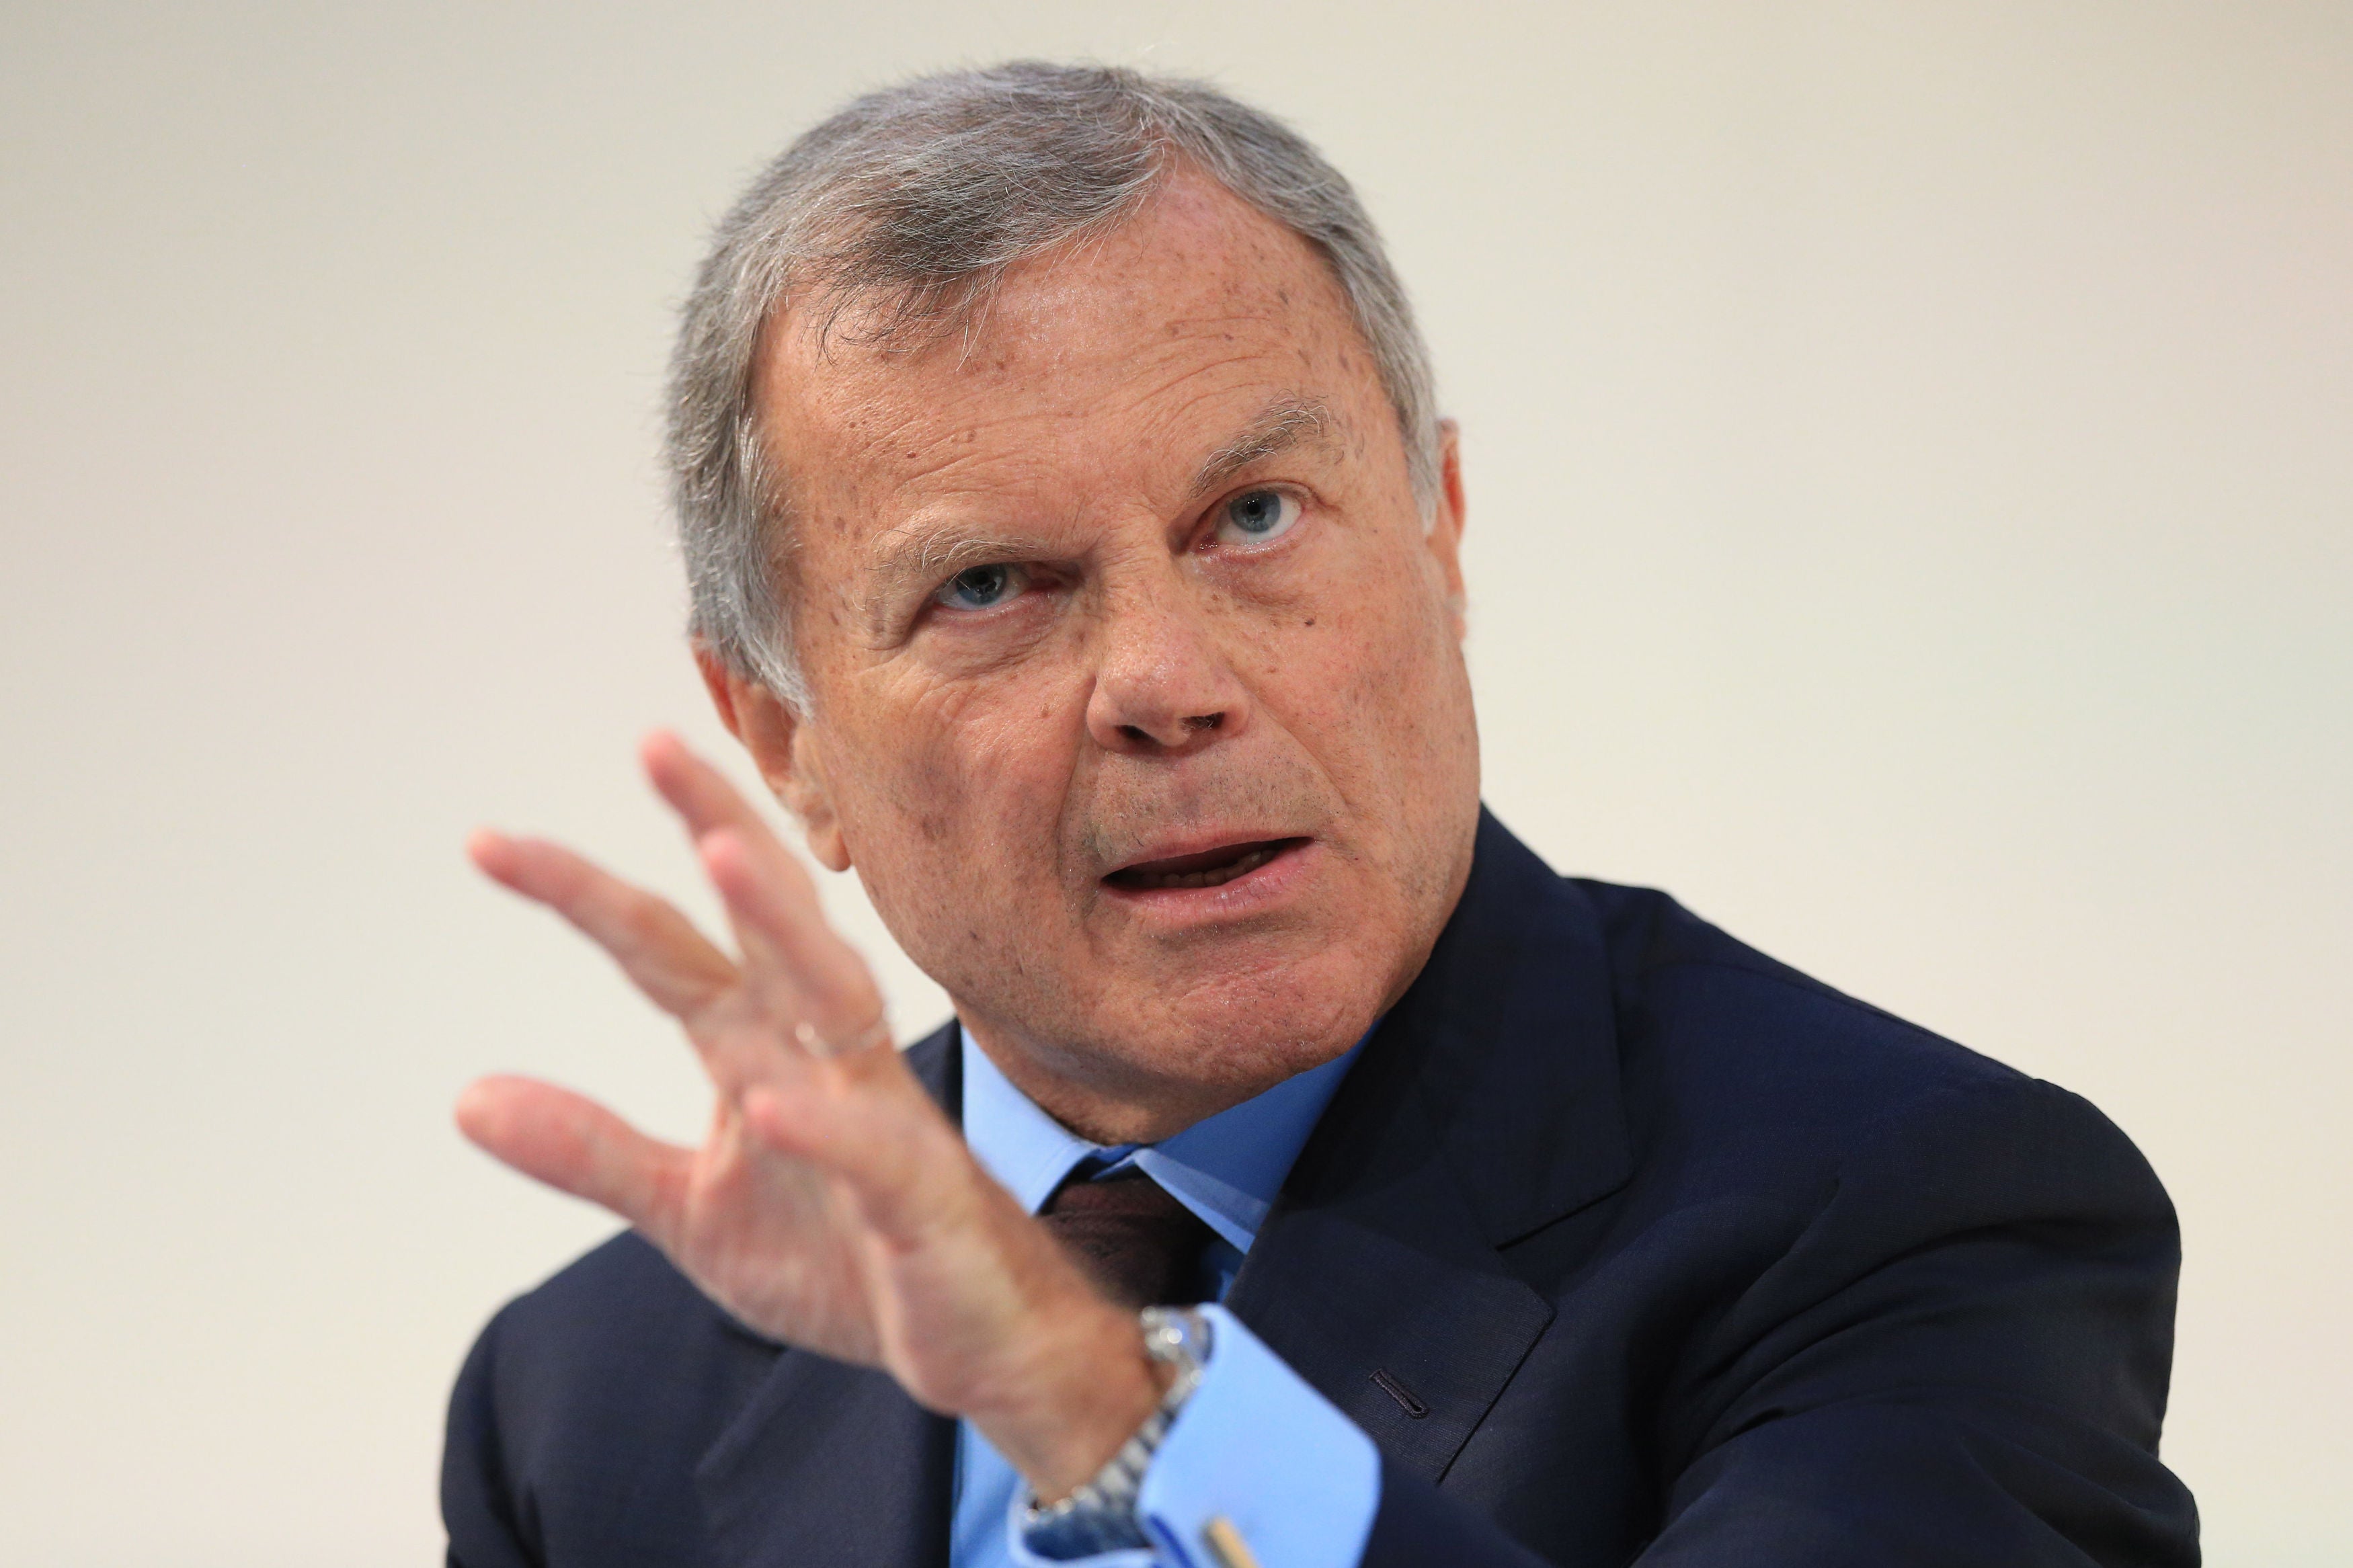 Financial Times apologises to former WPP boss Sir Martin Sorrell over article about 'disgraced' chief executives